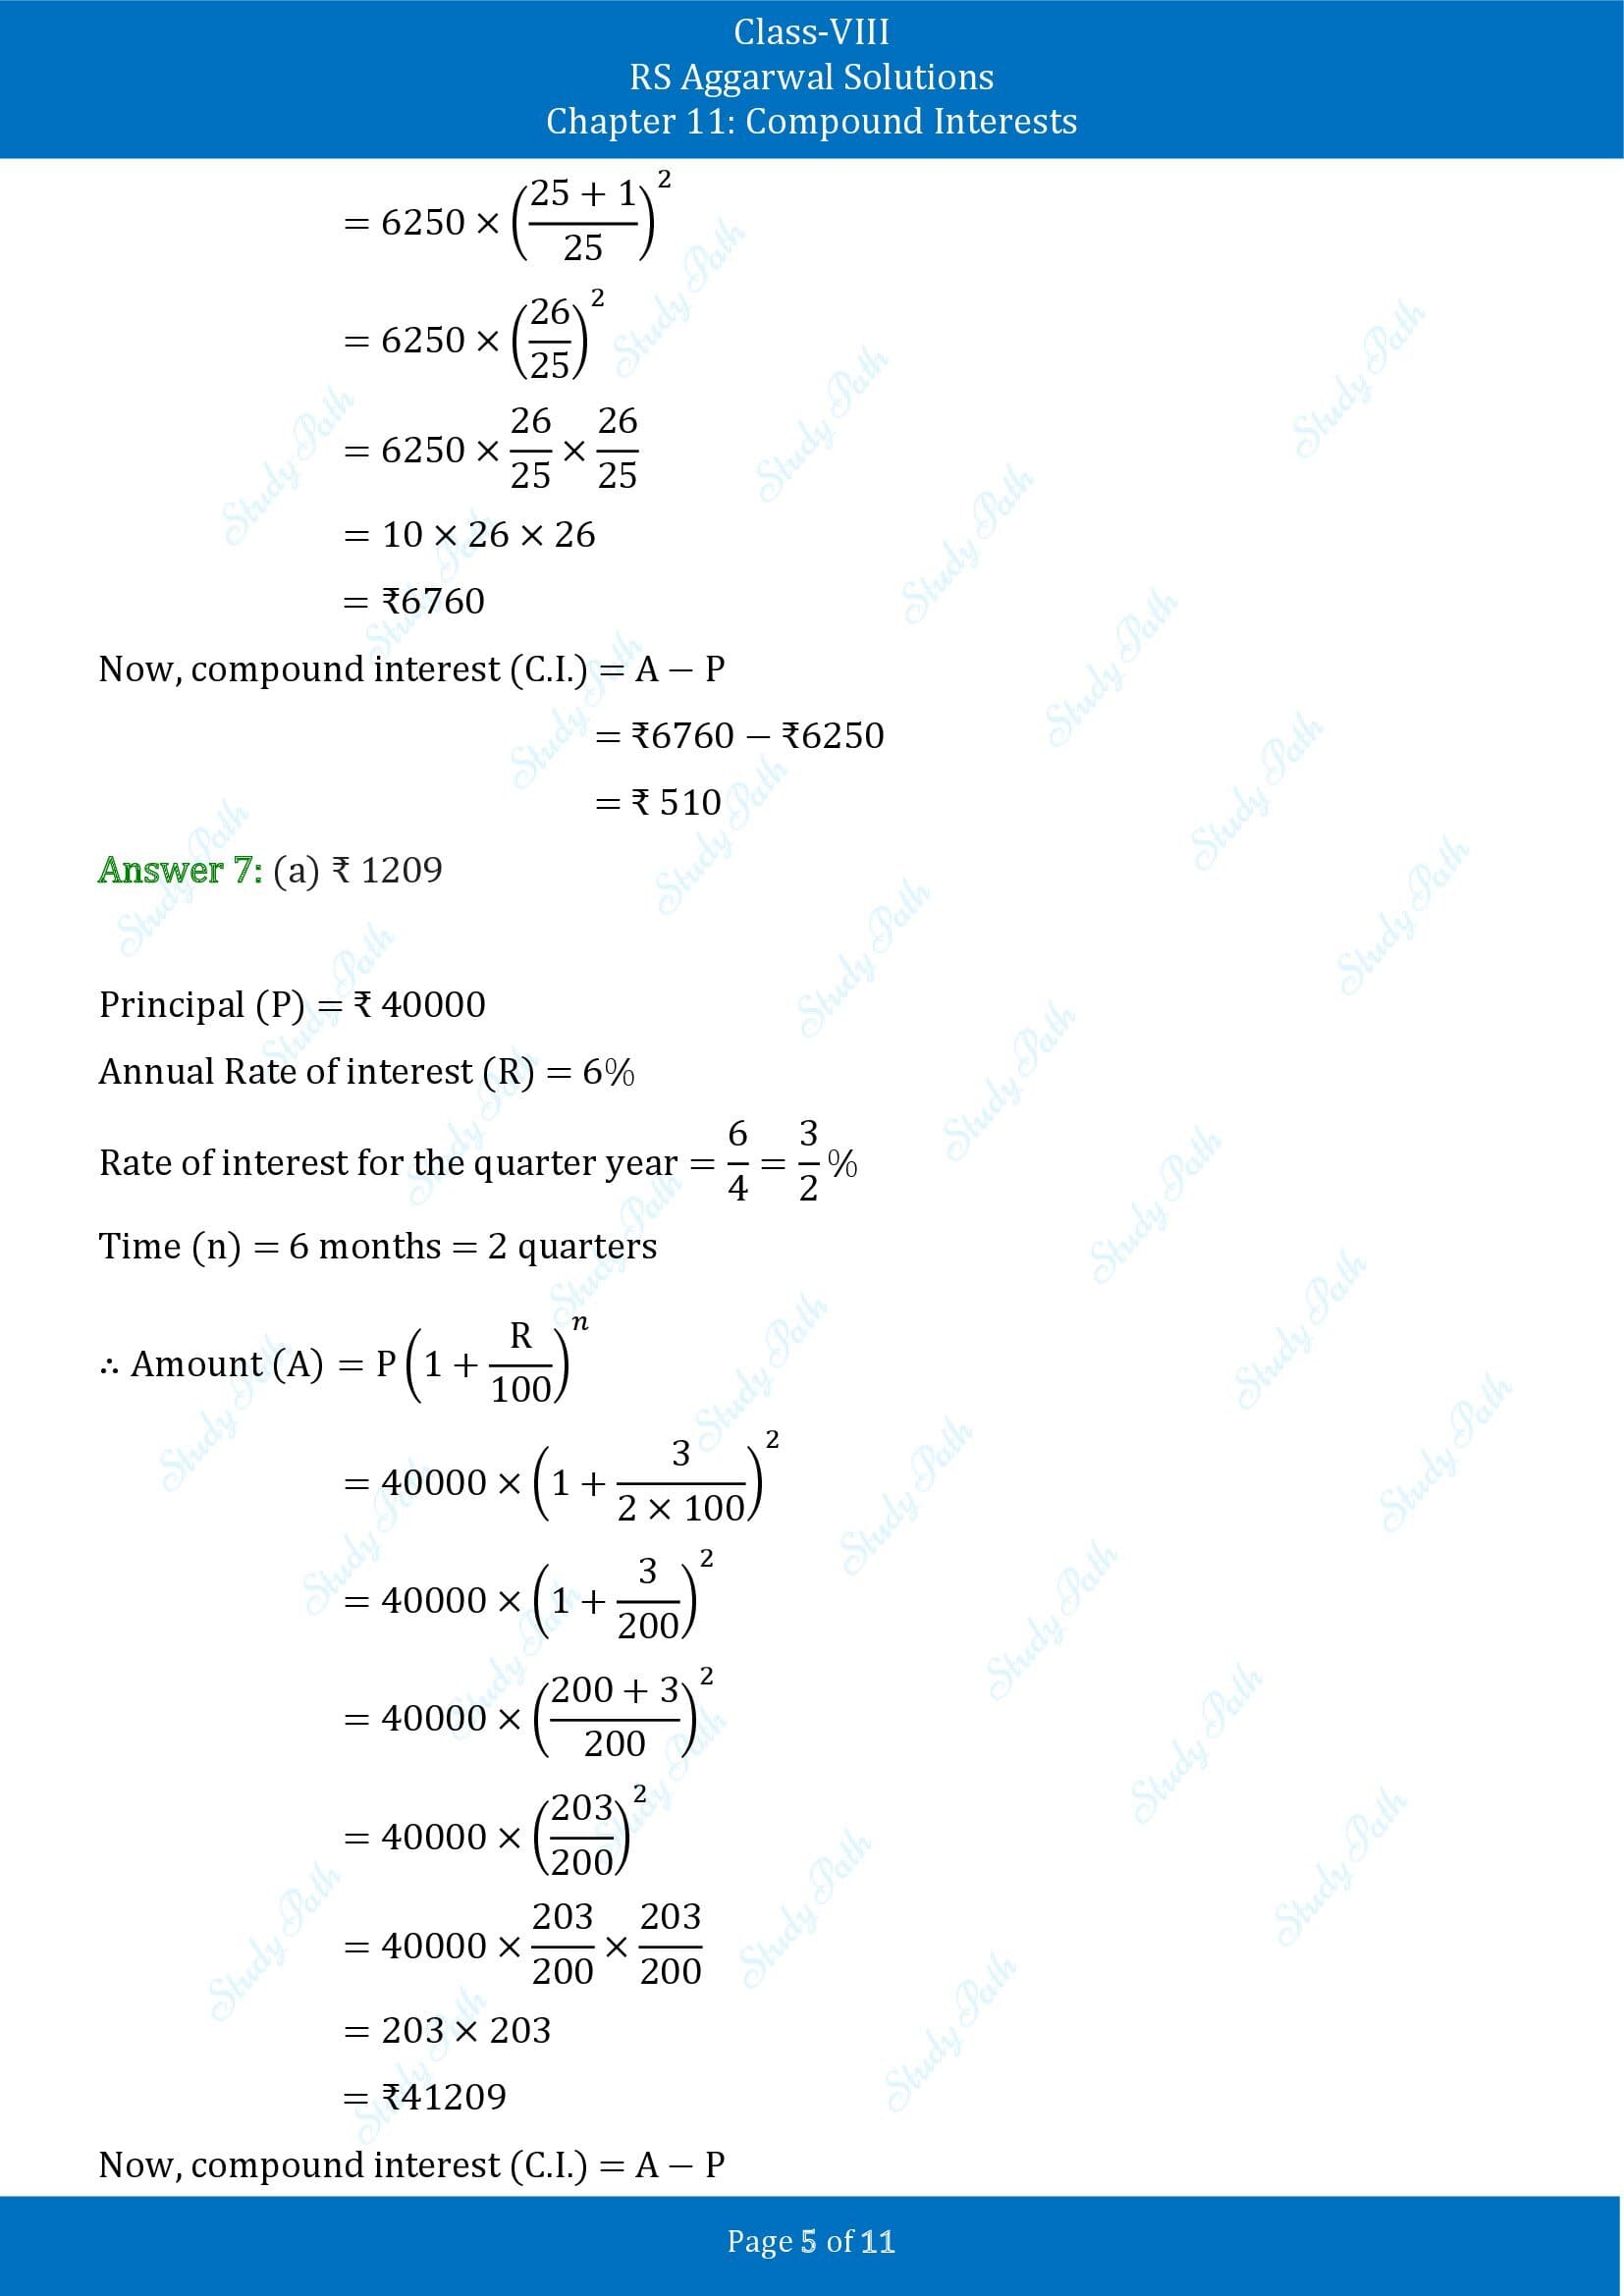 RS Aggarwal Solutions Class 8 Chapter 11 Compound Interests Exercise 11D MCQs 00005